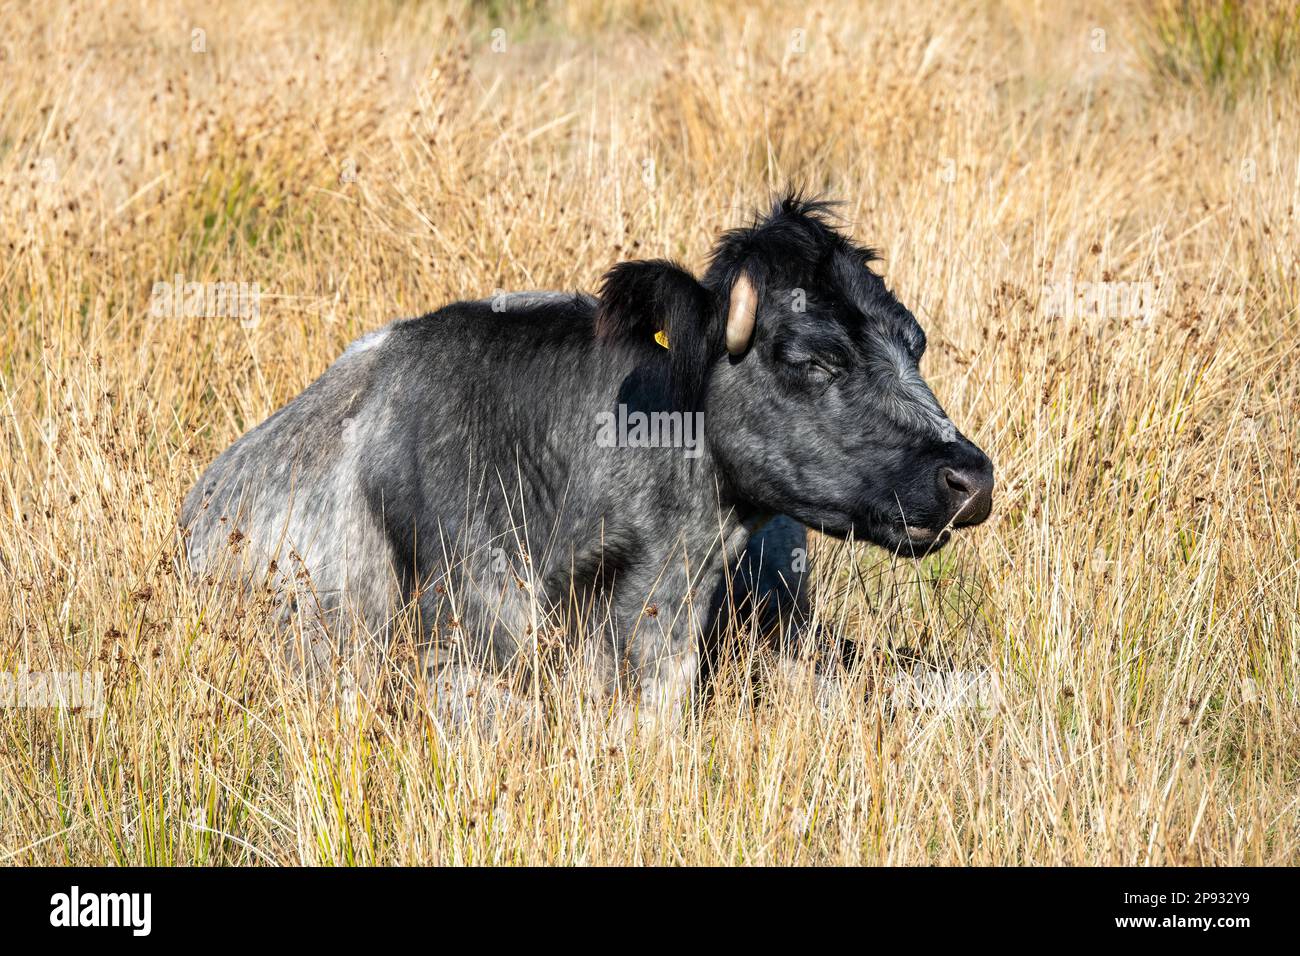 portrait of a black and grey cow with horns Stock Photo